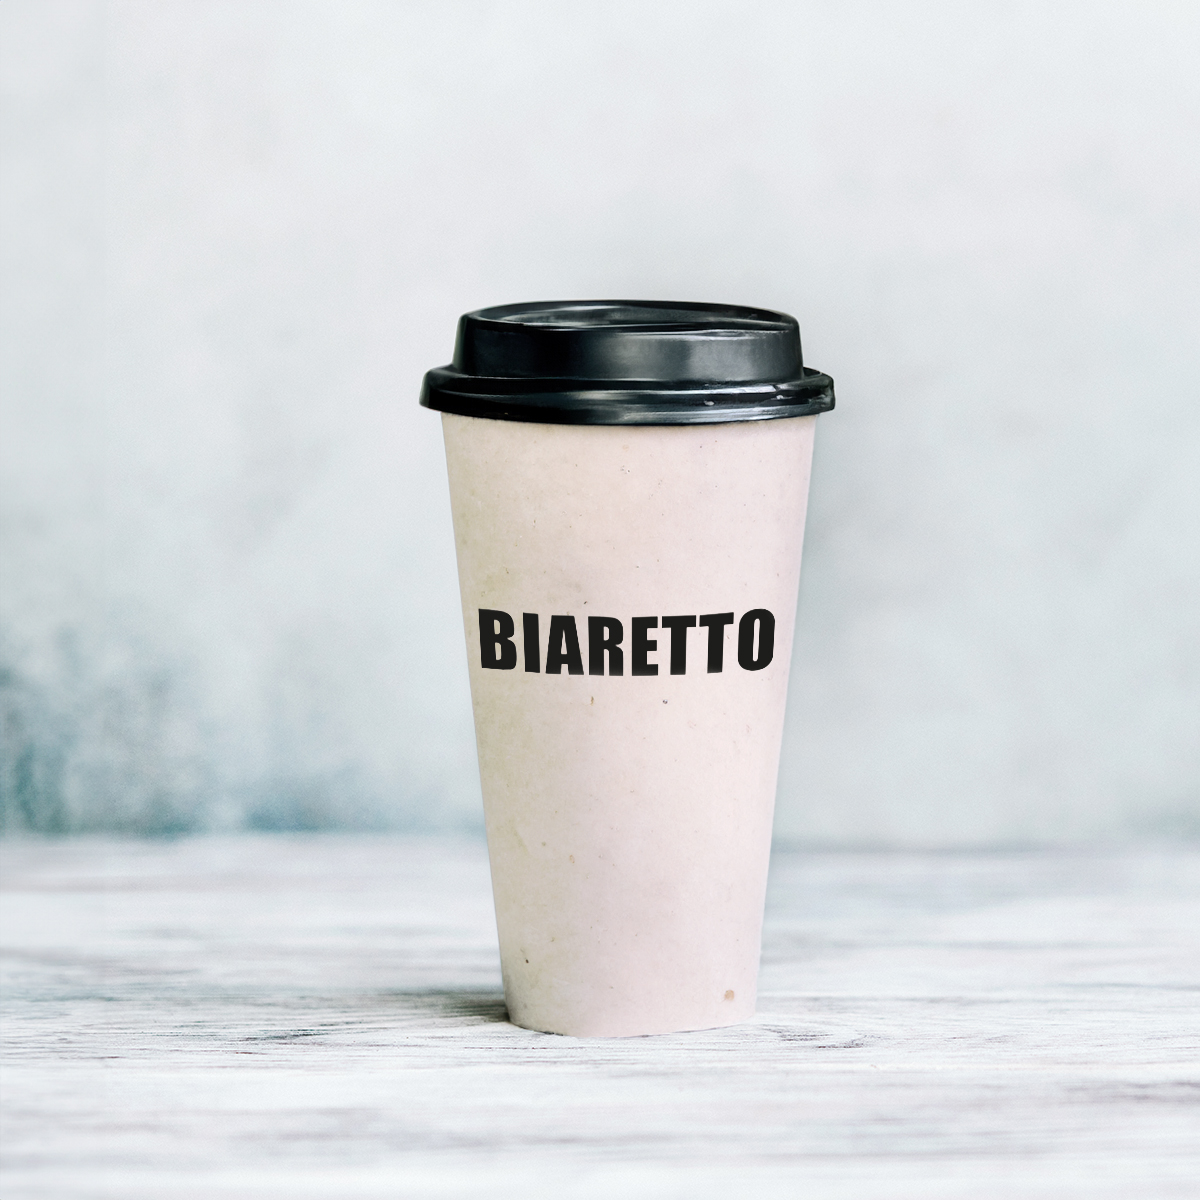 Now_cup_Biaretto_002.jpg